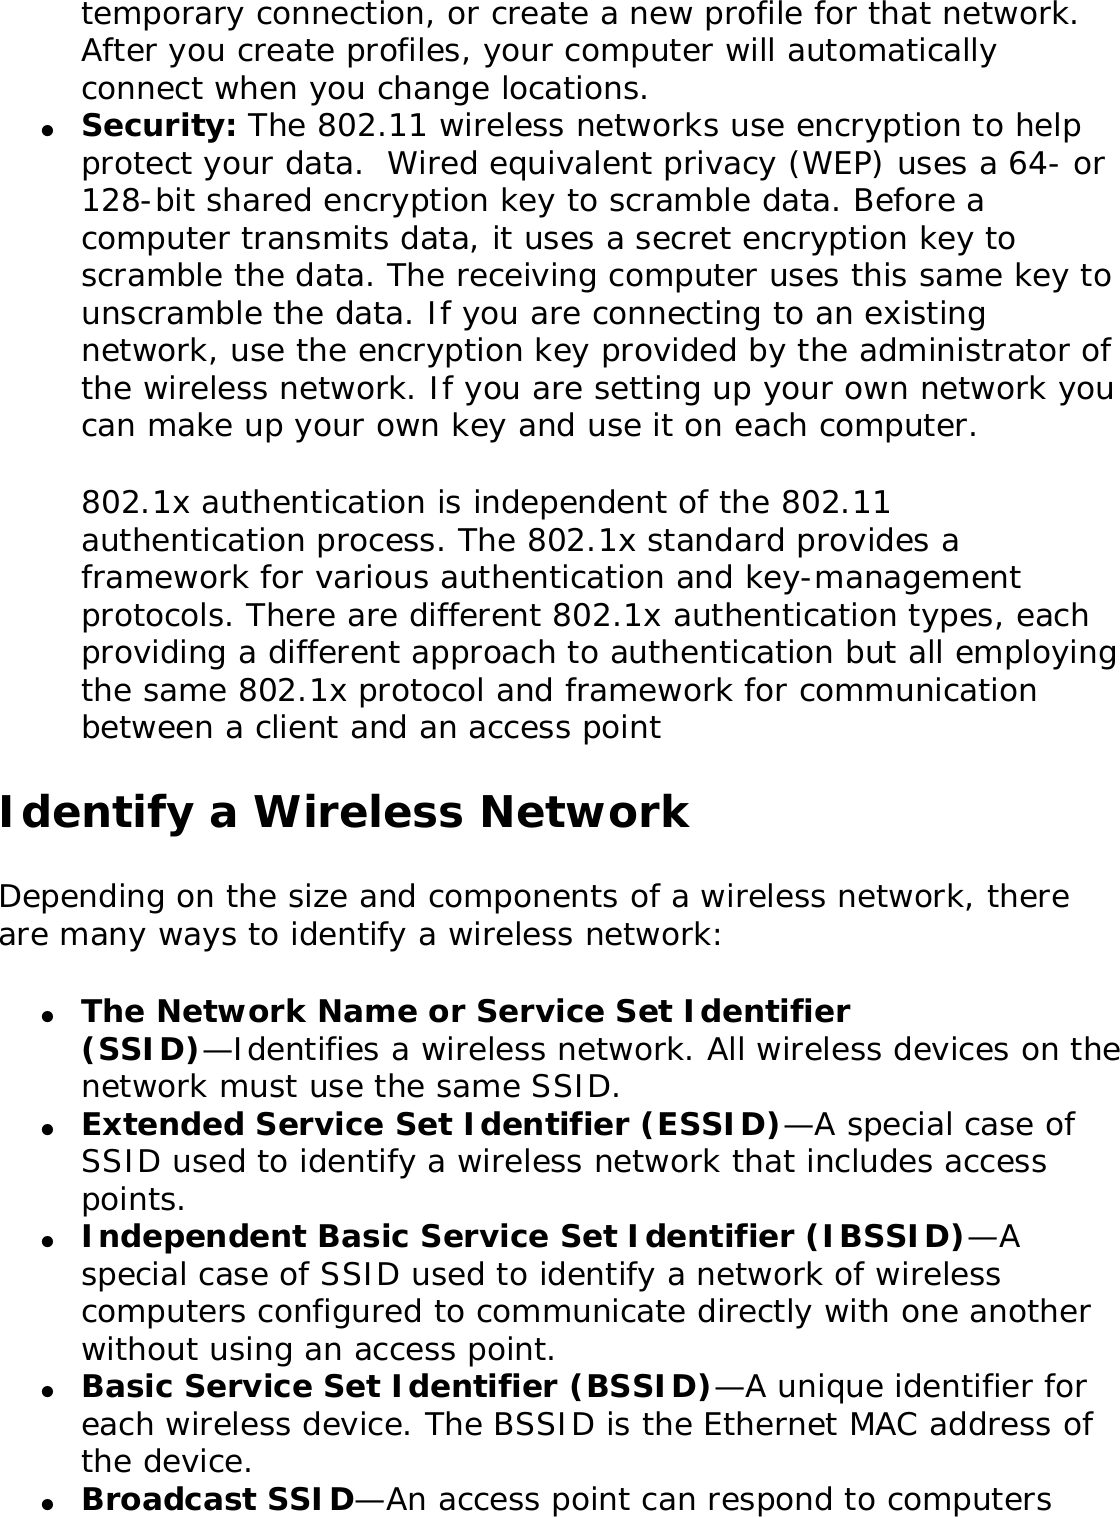 temporary connection, or create a new profile for that network. After you create profiles, your computer will automatically connect when you change locations.●     Security: The 802.11 wireless networks use encryption to help protect your data.  Wired equivalent privacy (WEP) uses a 64- or 128-bit shared encryption key to scramble data. Before a computer transmits data, it uses a secret encryption key to scramble the data. The receiving computer uses this same key to unscramble the data. If you are connecting to an existing network, use the encryption key provided by the administrator of the wireless network. If you are setting up your own network you can make up your own key and use it on each computer. 802.1x authentication is independent of the 802.11 authentication process. The 802.1x standard provides a framework for various authentication and key-management protocols. There are different 802.1x authentication types, each providing a different approach to authentication but all employing the same 802.1x protocol and framework for communication between a client and an access point Identify a Wireless NetworkDepending on the size and components of a wireless network, there are many ways to identify a wireless network: ●     The Network Name or Service Set Identifier (SSID)—Identifies a wireless network. All wireless devices on the network must use the same SSID. ●     Extended Service Set Identifier (ESSID)—A special case of SSID used to identify a wireless network that includes access points. ●     Independent Basic Service Set Identifier (IBSSID)—A special case of SSID used to identify a network of wireless computers configured to communicate directly with one another without using an access point. ●     Basic Service Set Identifier (BSSID)—A unique identifier for each wireless device. The BSSID is the Ethernet MAC address of the device. ●     Broadcast SSID—An access point can respond to computers 